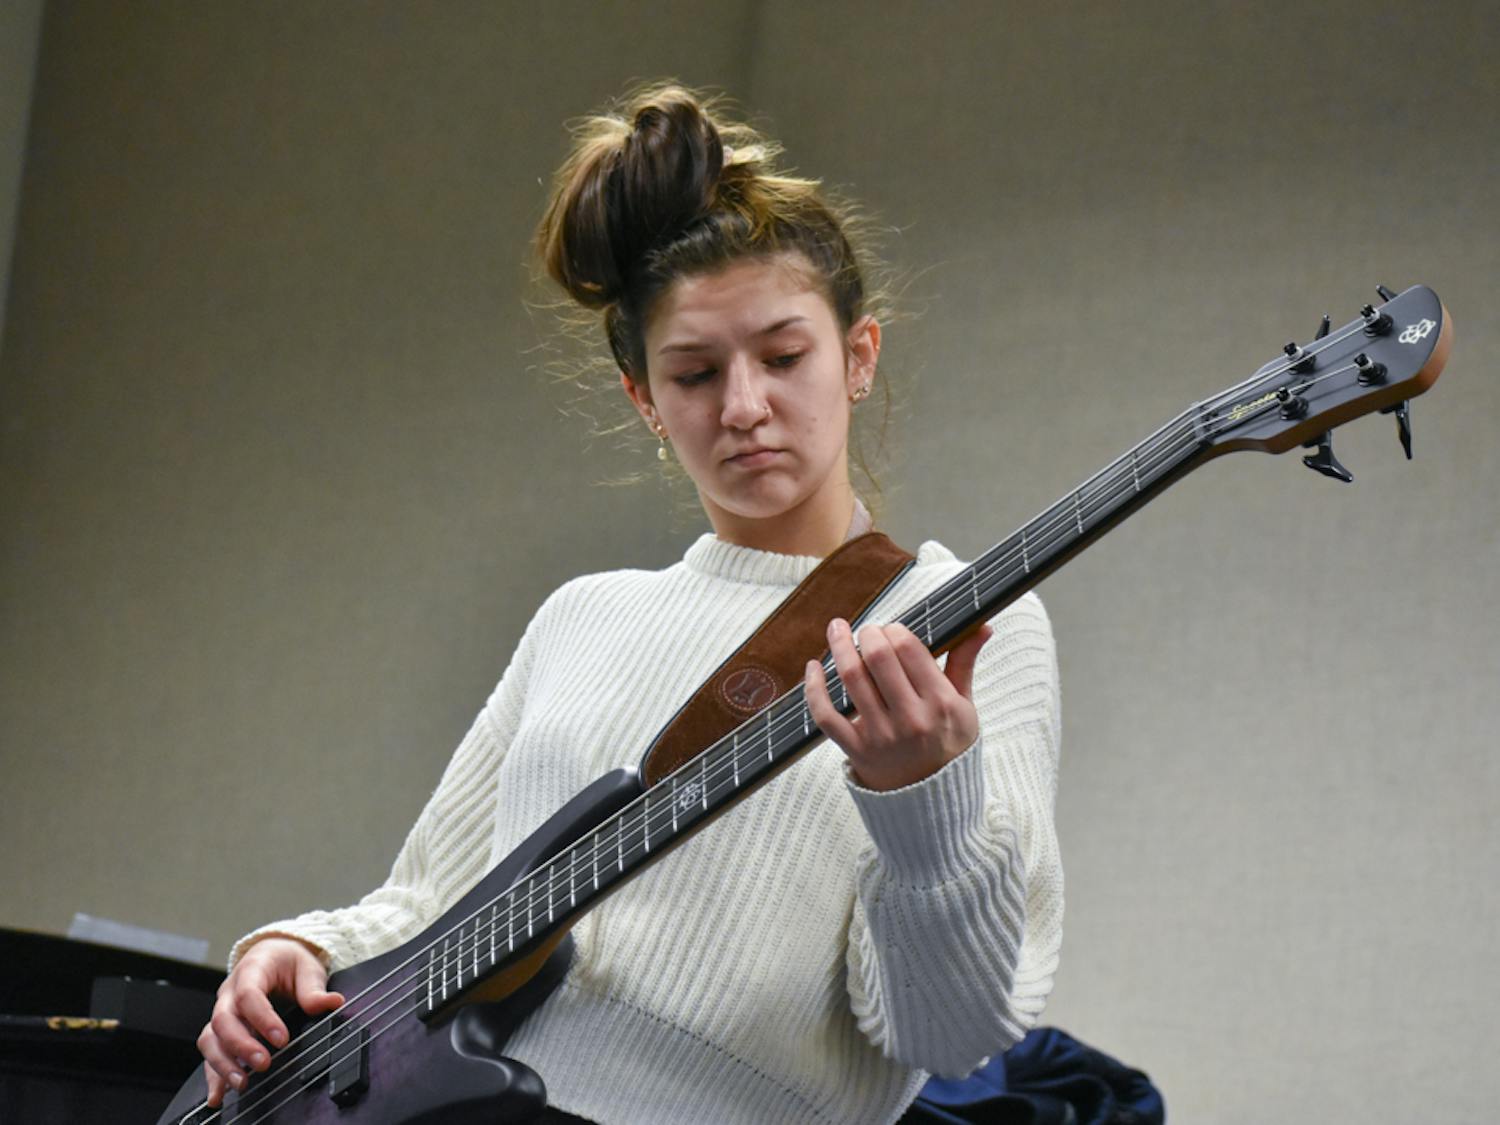 Wilberger plays bass for the ensemble. Students in USC’s School of Music’s commercial music ensemble class said they have found comfort in performing and playing music as an outlet for creative therapy.